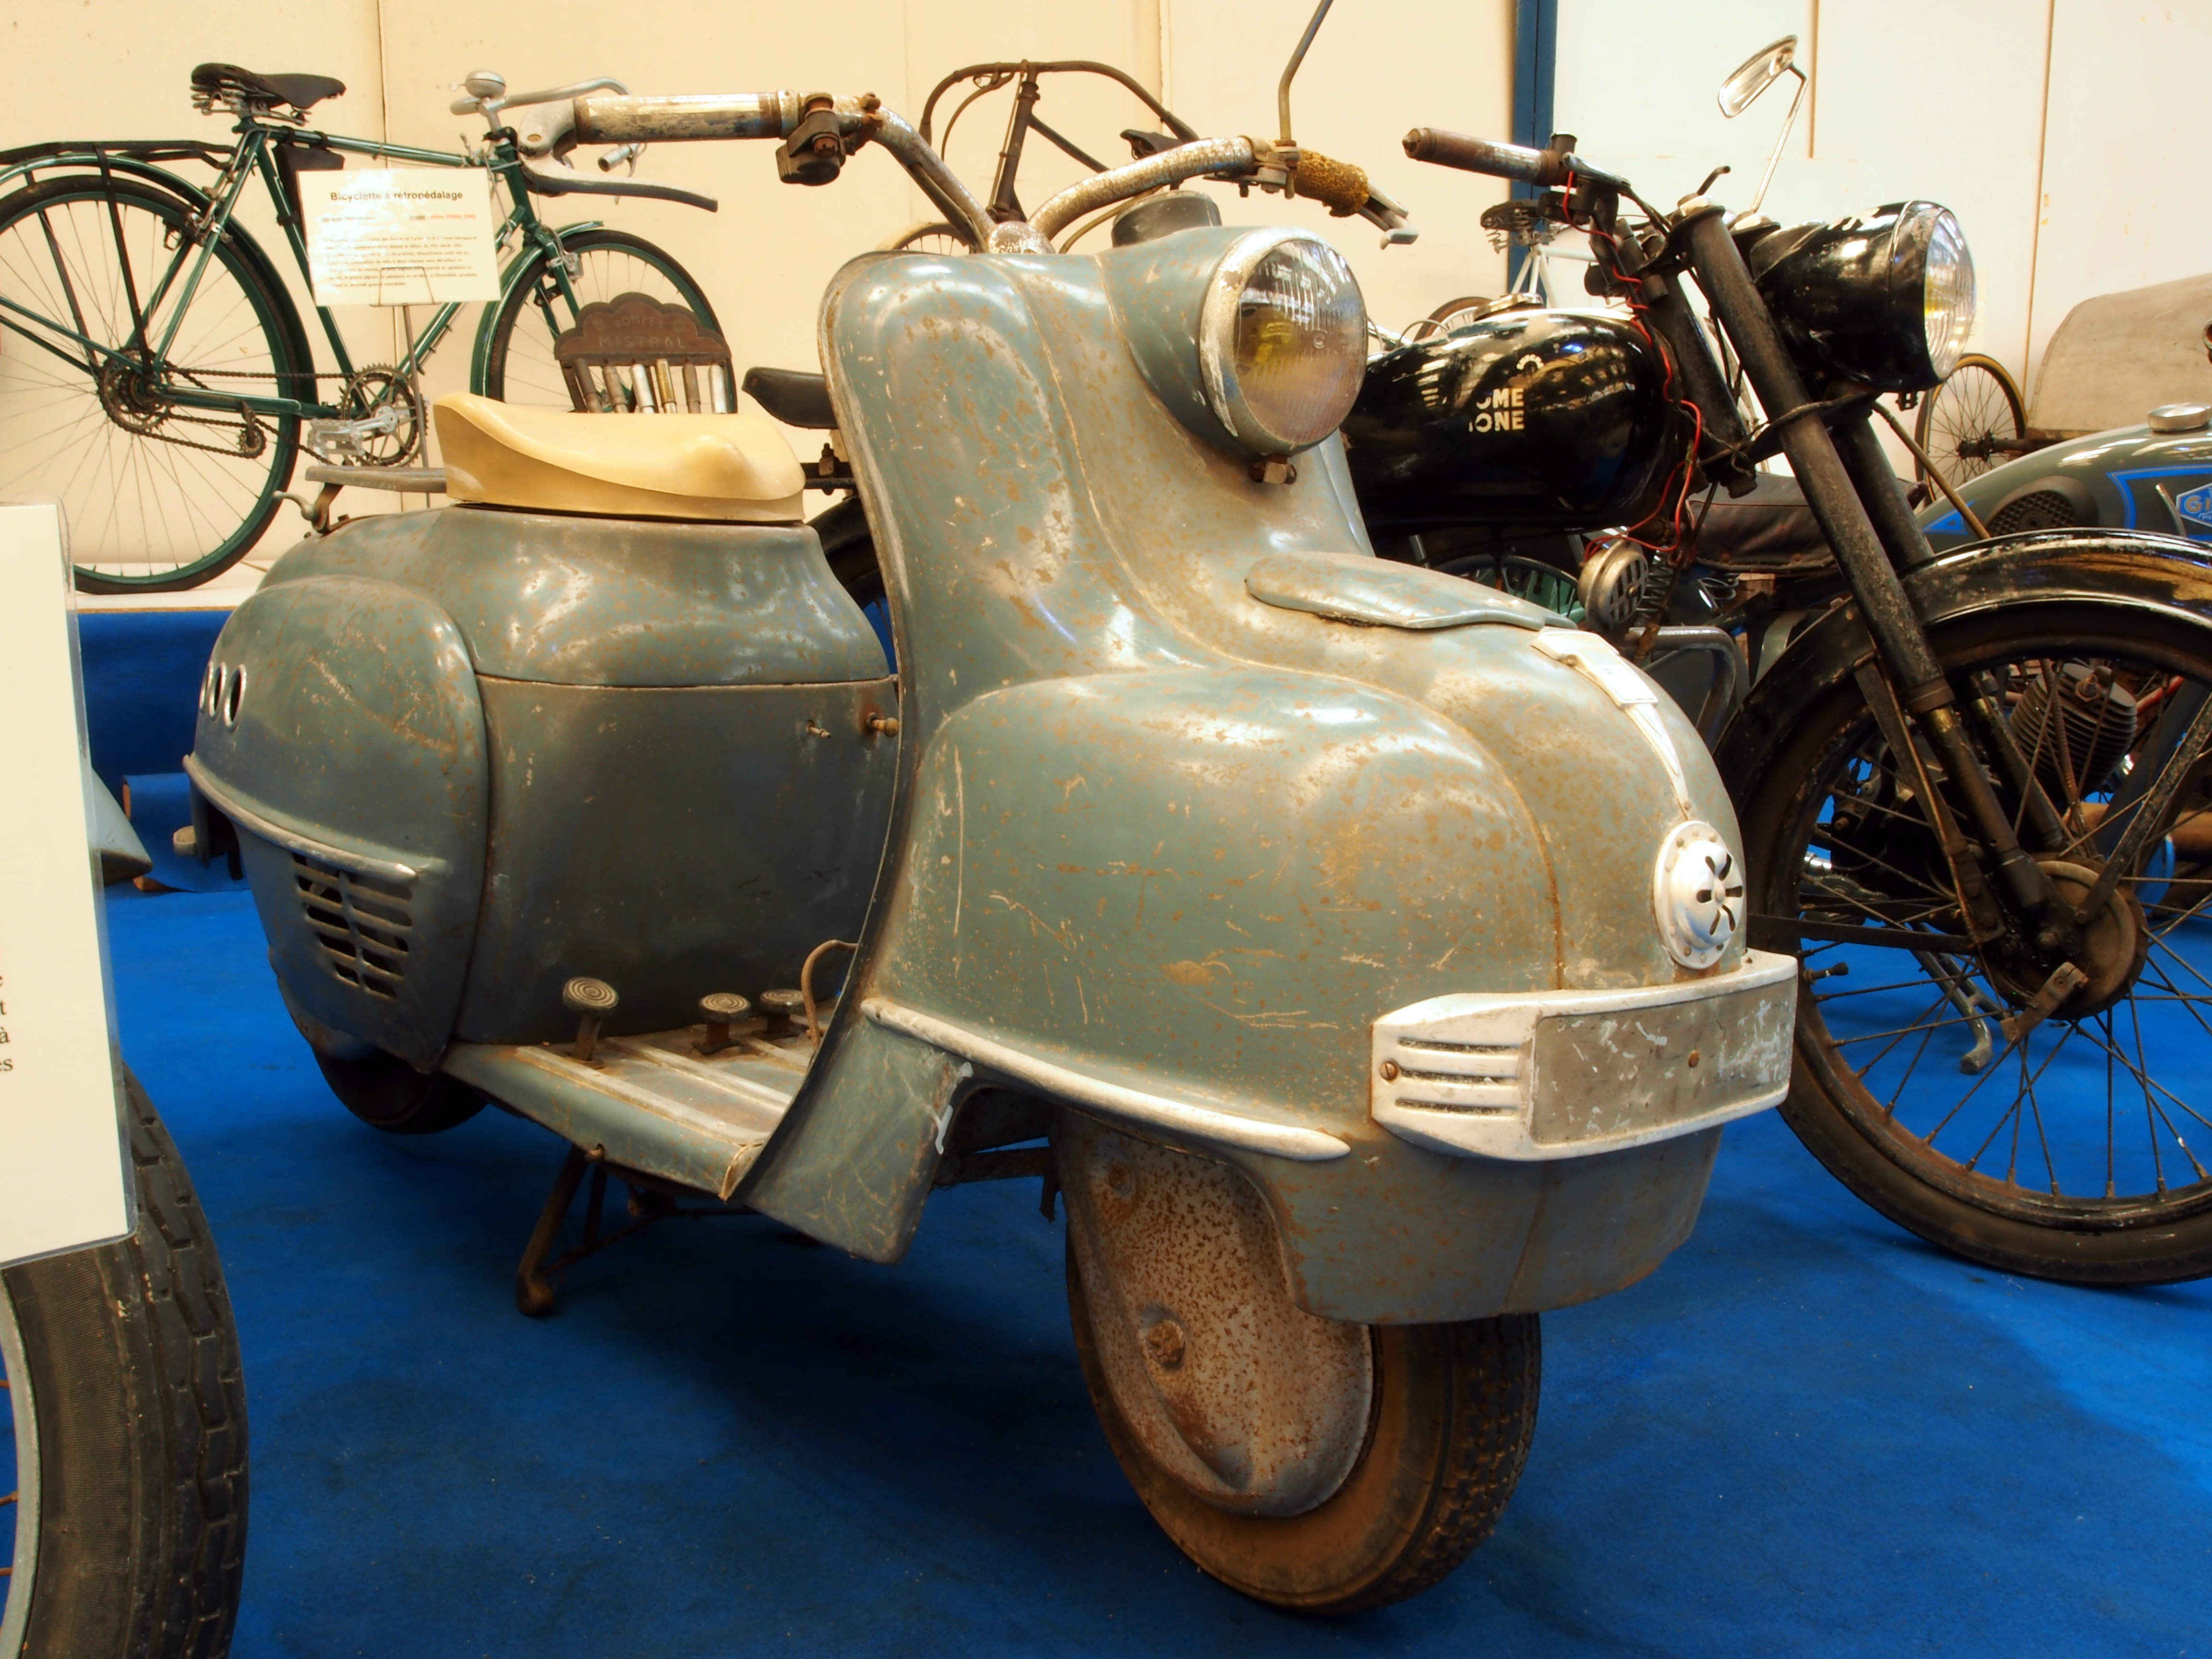 File:Old Scooter at Automobile museum Reims.JPG - Wikimedia Commons